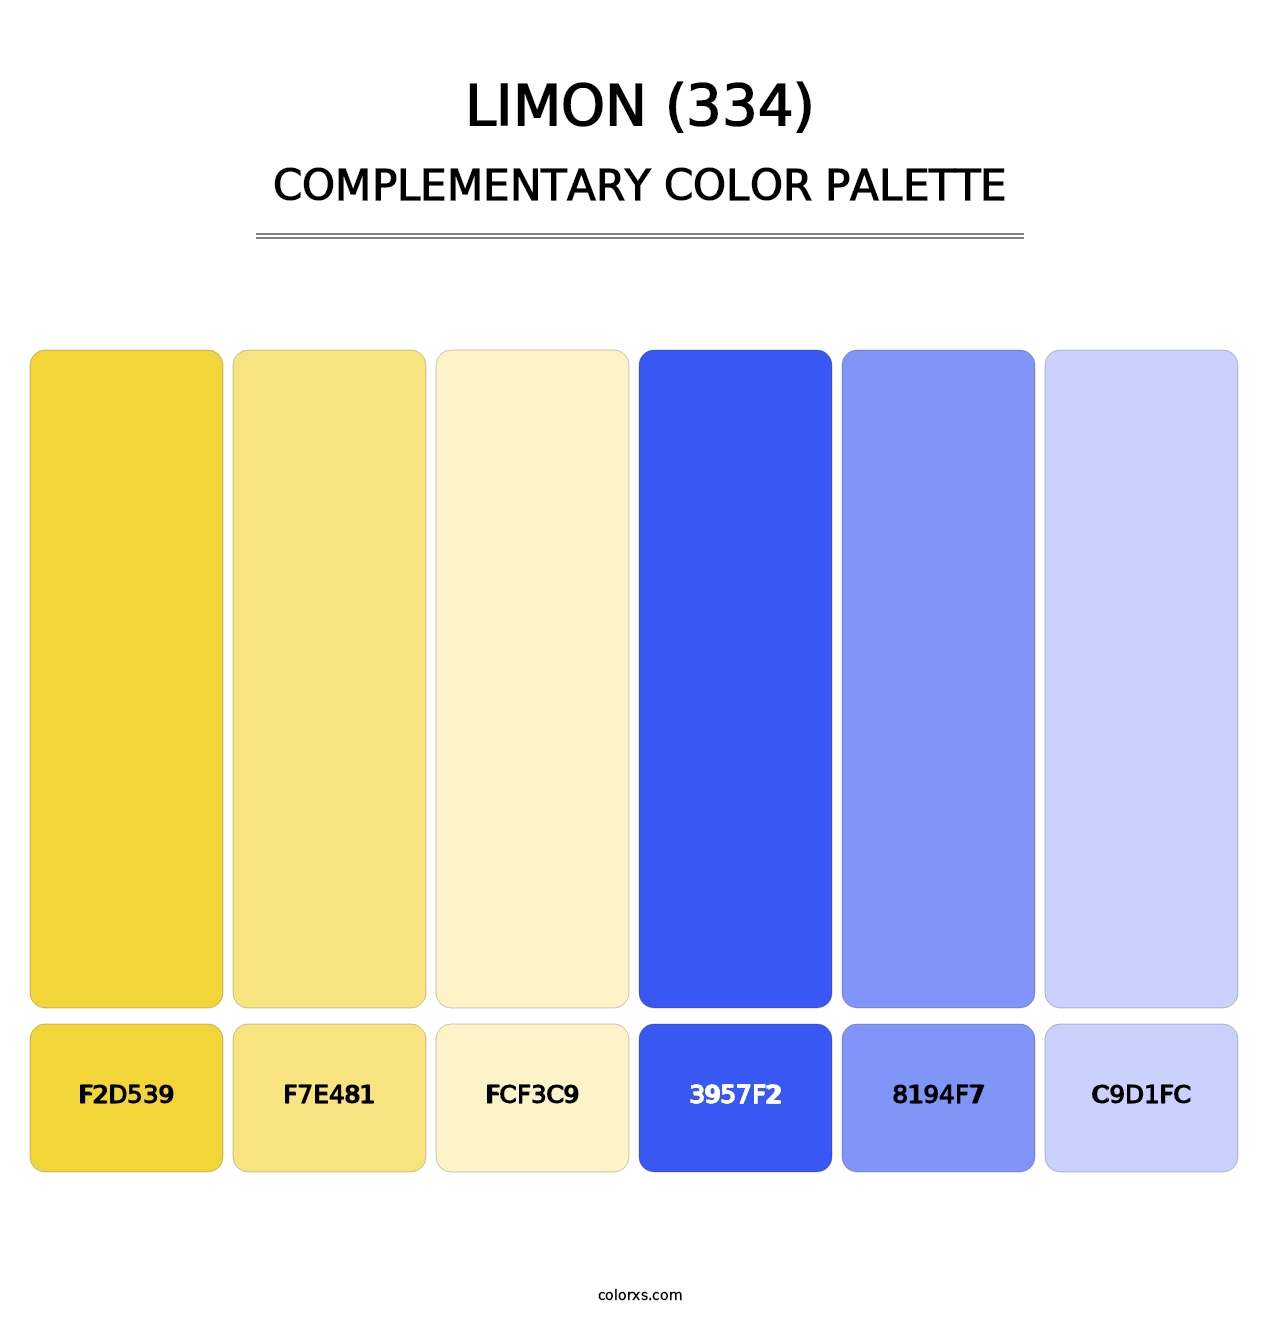 Limon (334) - Complementary Color Palette